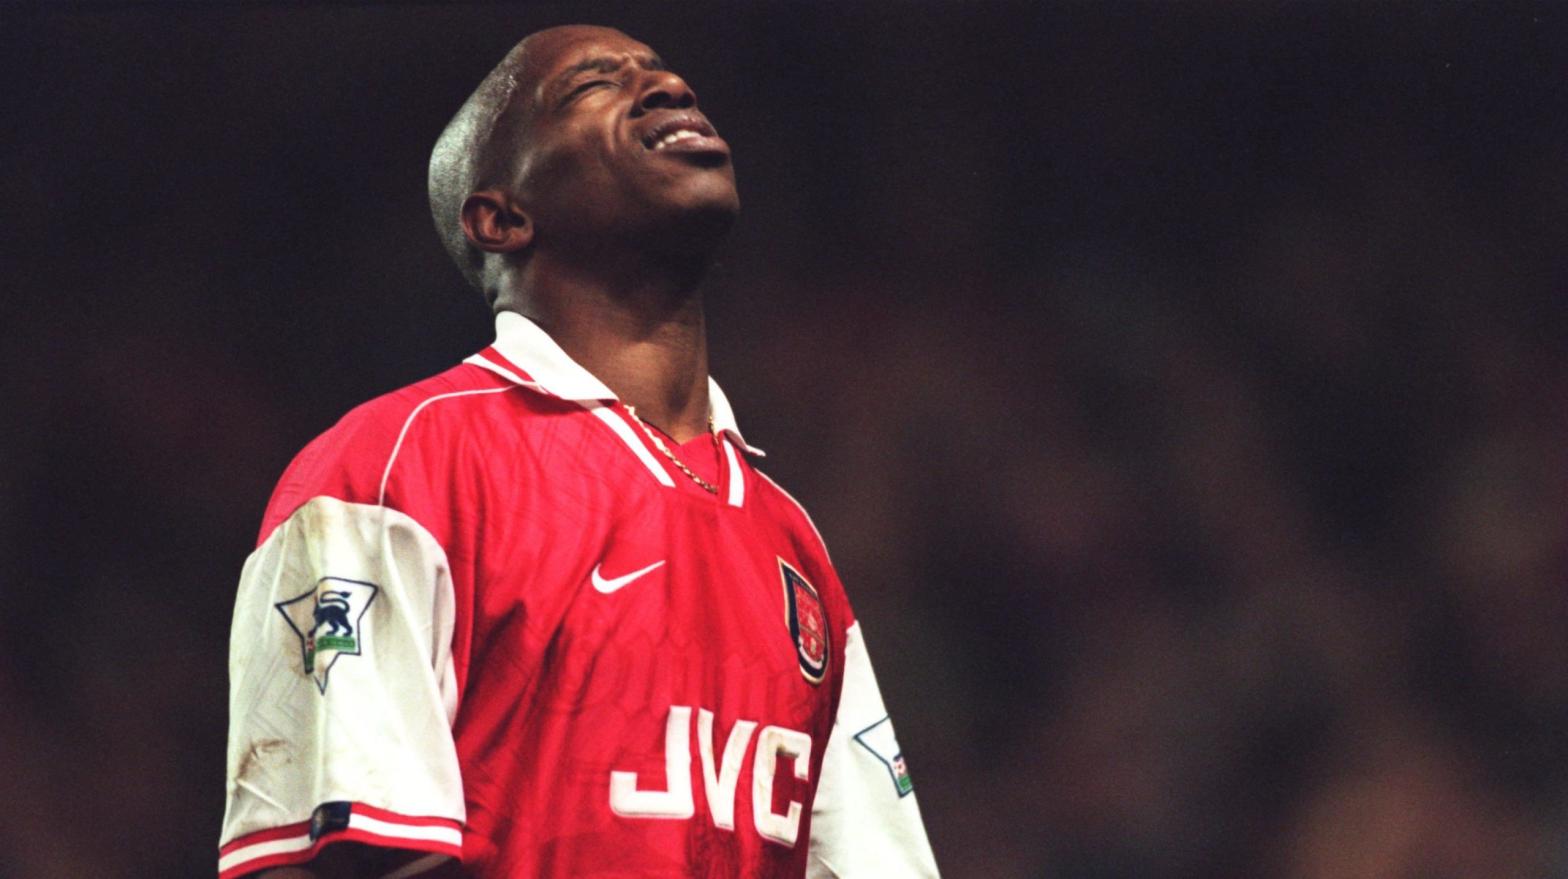 Ian Wright during his playing days for Arsenal (Photo: Ben Radford, Getty Images)